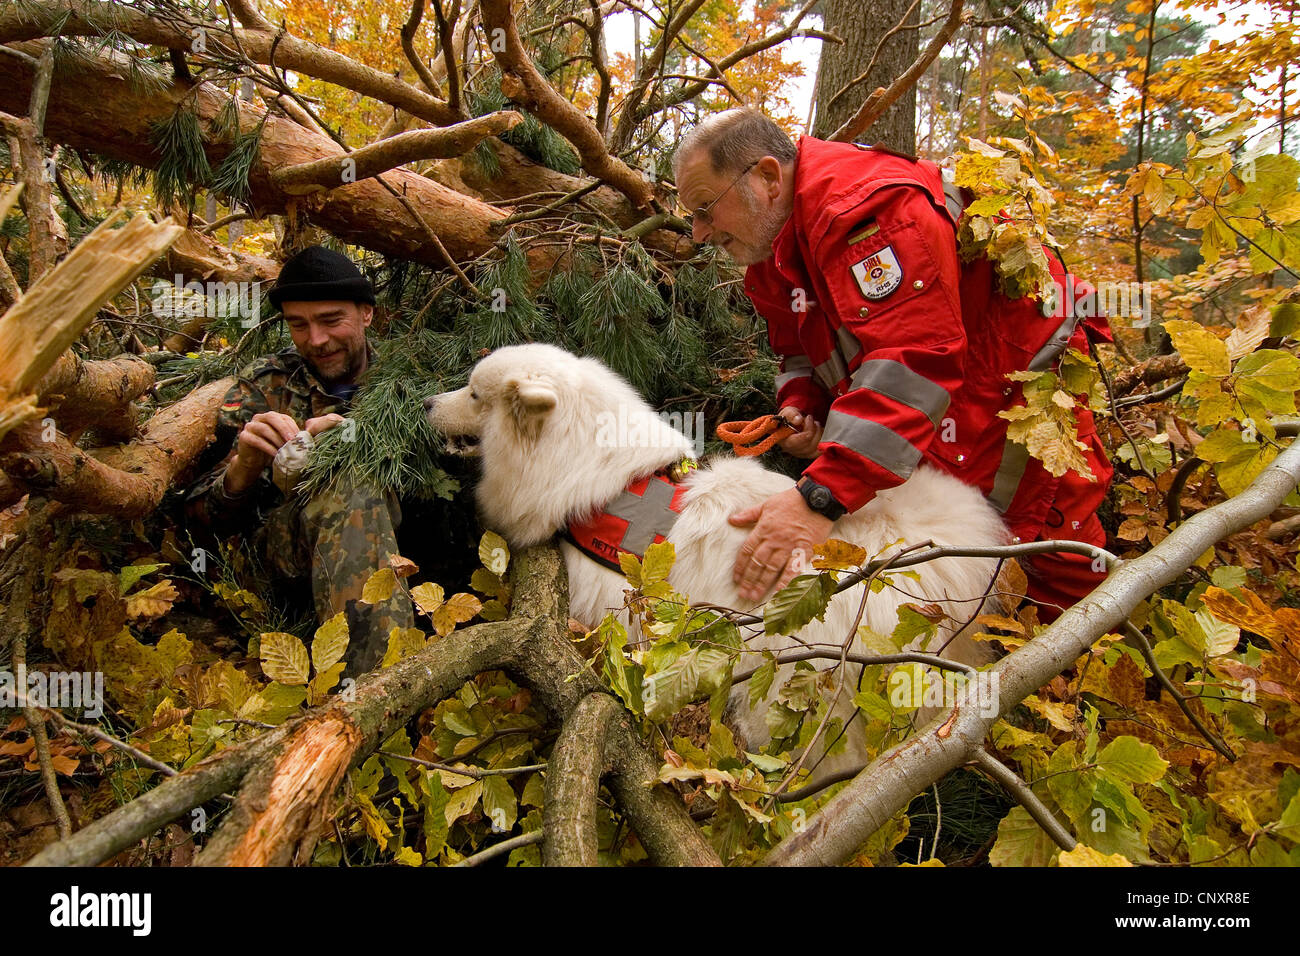 Samoyed (Canis lupus f. familiaris), search and rescue dog finding a person in heavy brush Stock Photo